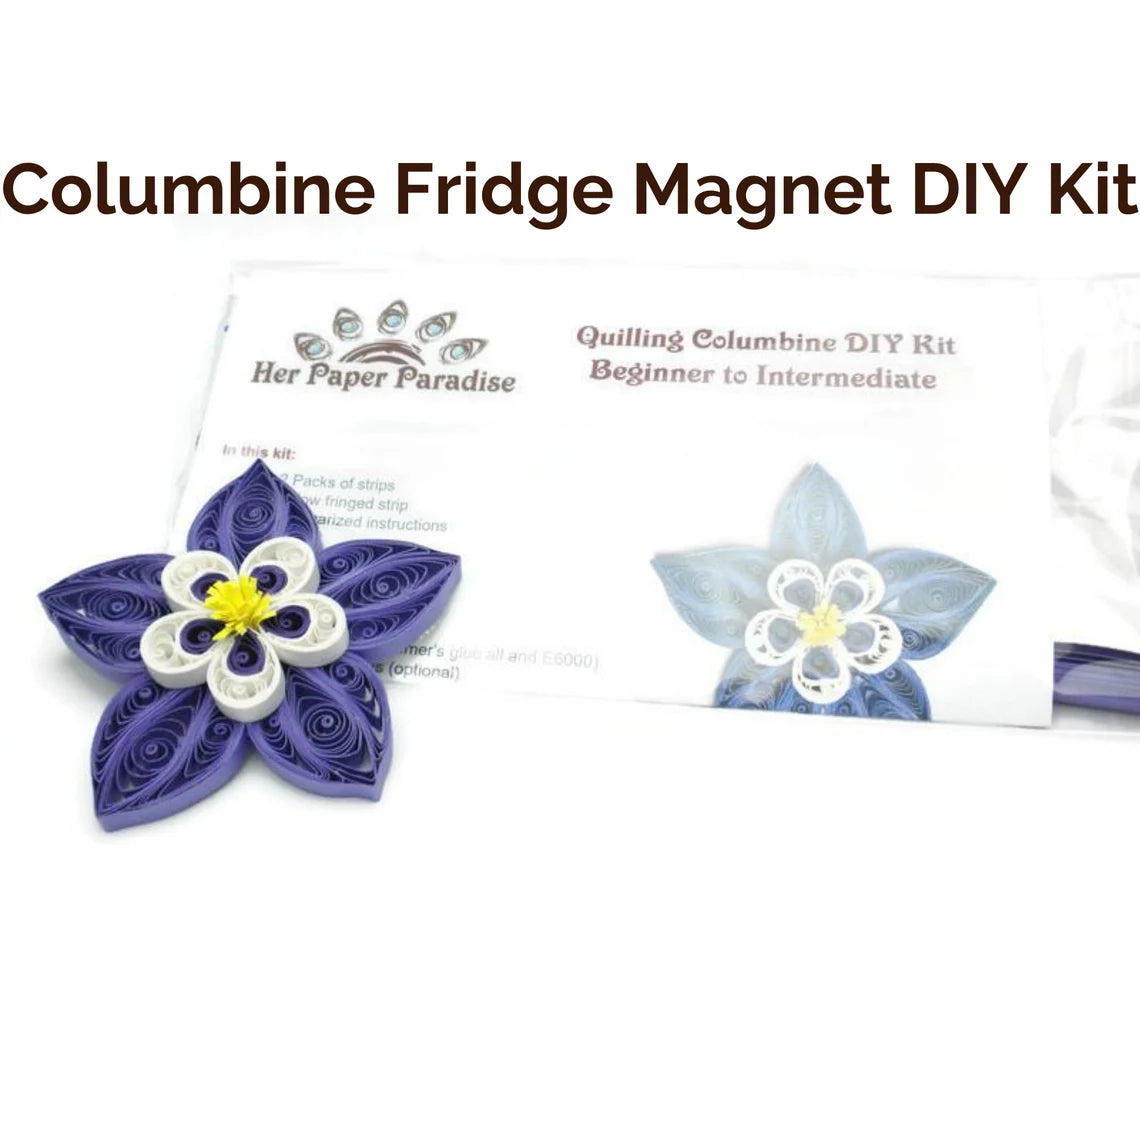 Quilling Columbine DIY fridge magnet kit with step-by-step tutorial by Her Paper Paradise